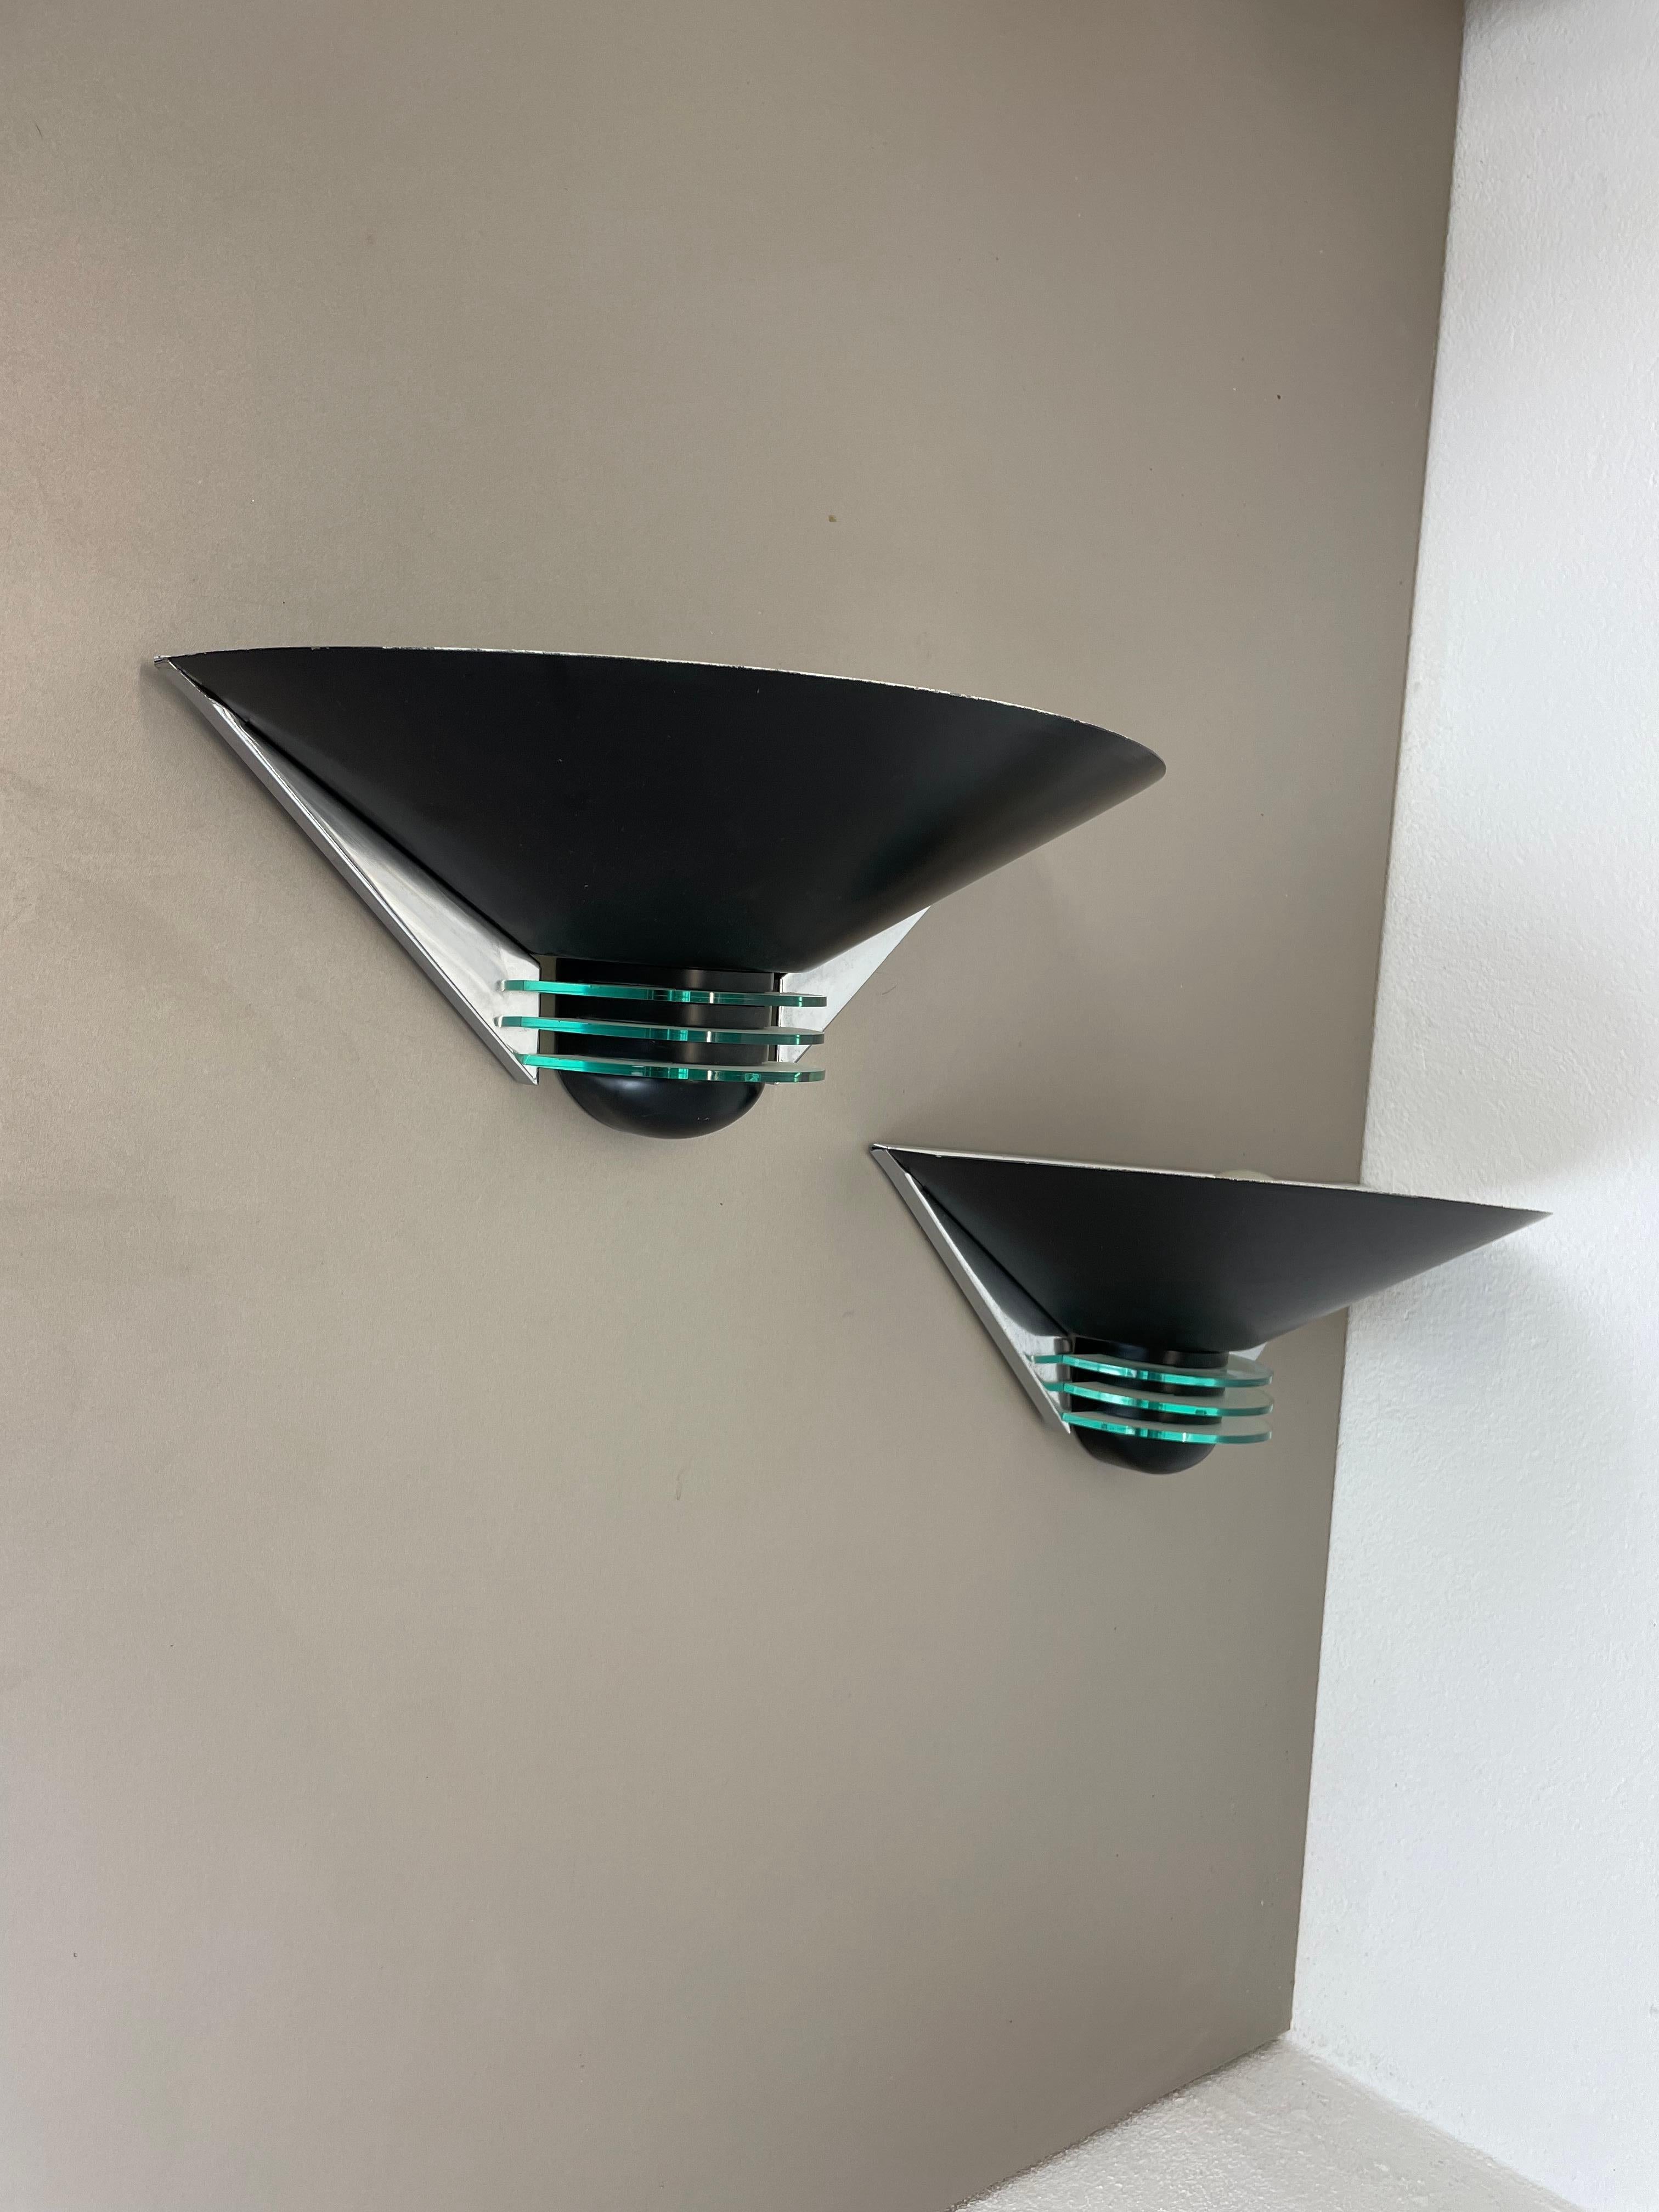 Article:

wall light set of 2



Producer: Hustadt Leuchten, Germany



Origin: Germany in the manner of Postmodern memphis design



Age:

1980s





This postmodern light set was produced in Germany in the 1980s by Hustadt Leuchten. It is made